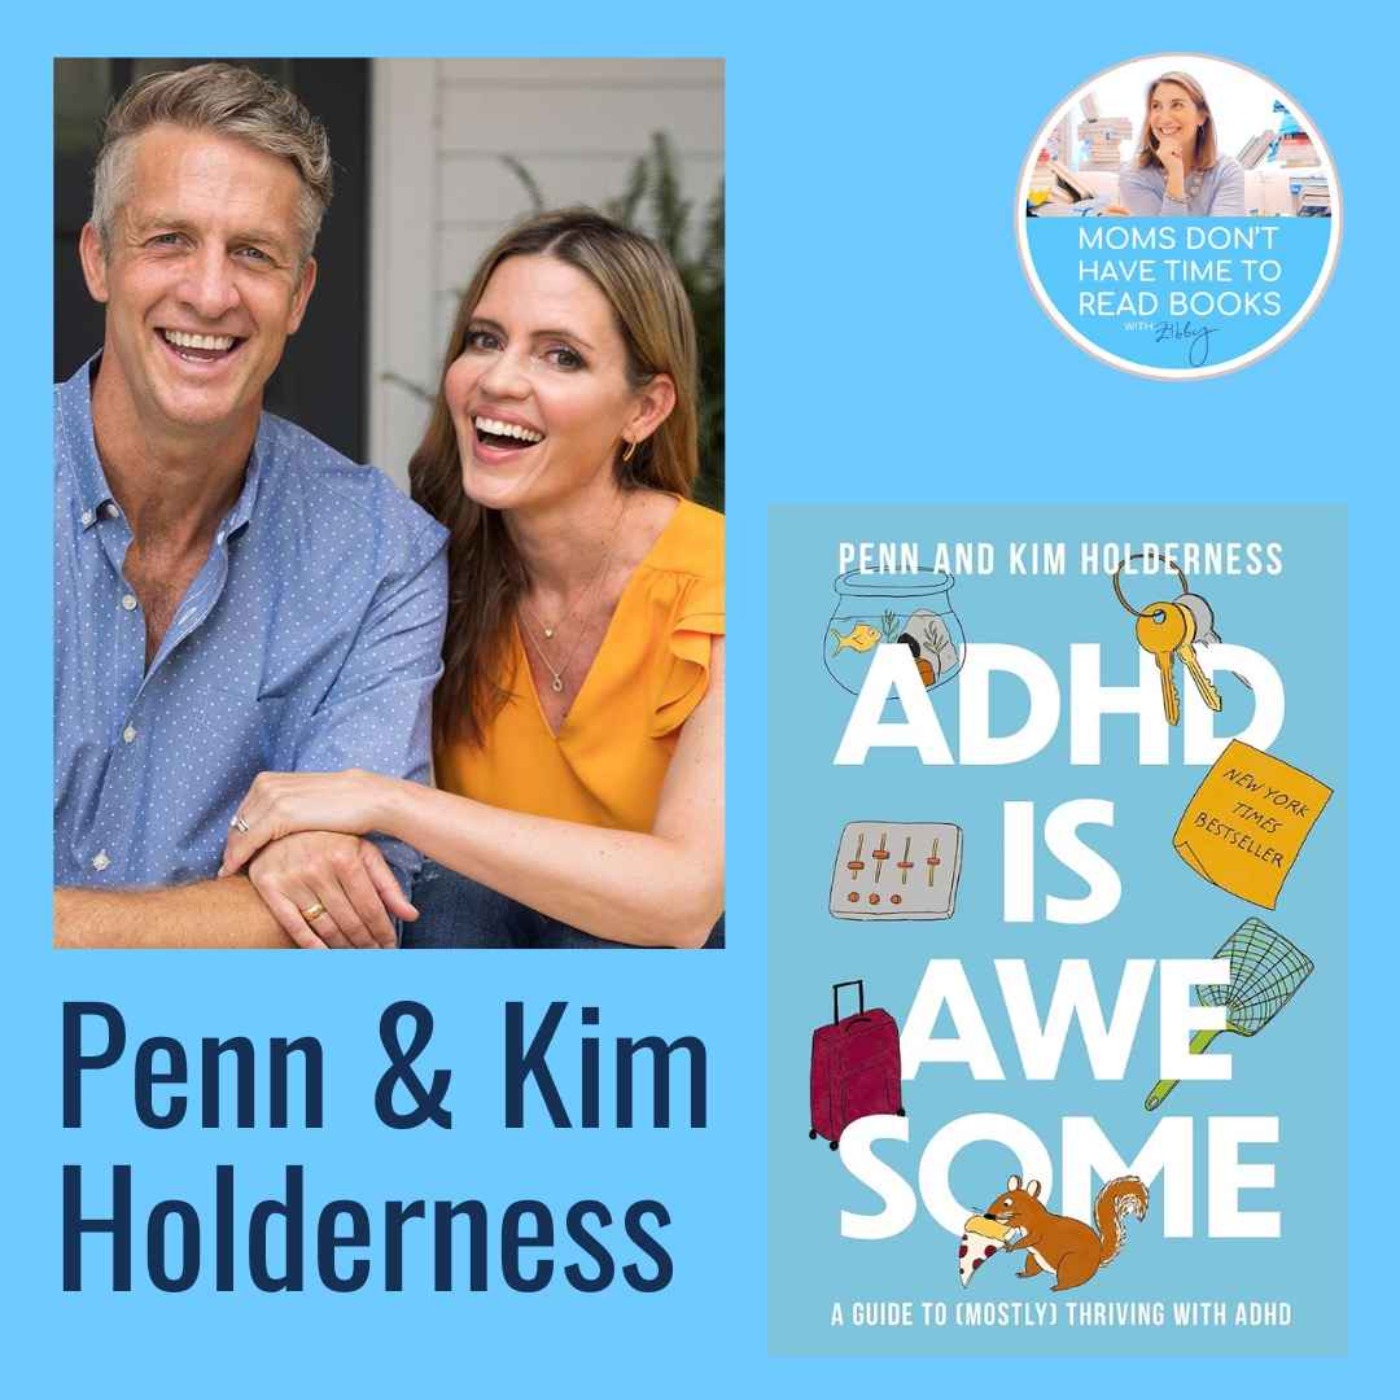 Award-Winning YouTubers! ADHD IS AWESOME: A Guide to (Mostly) Thriving with ADHD